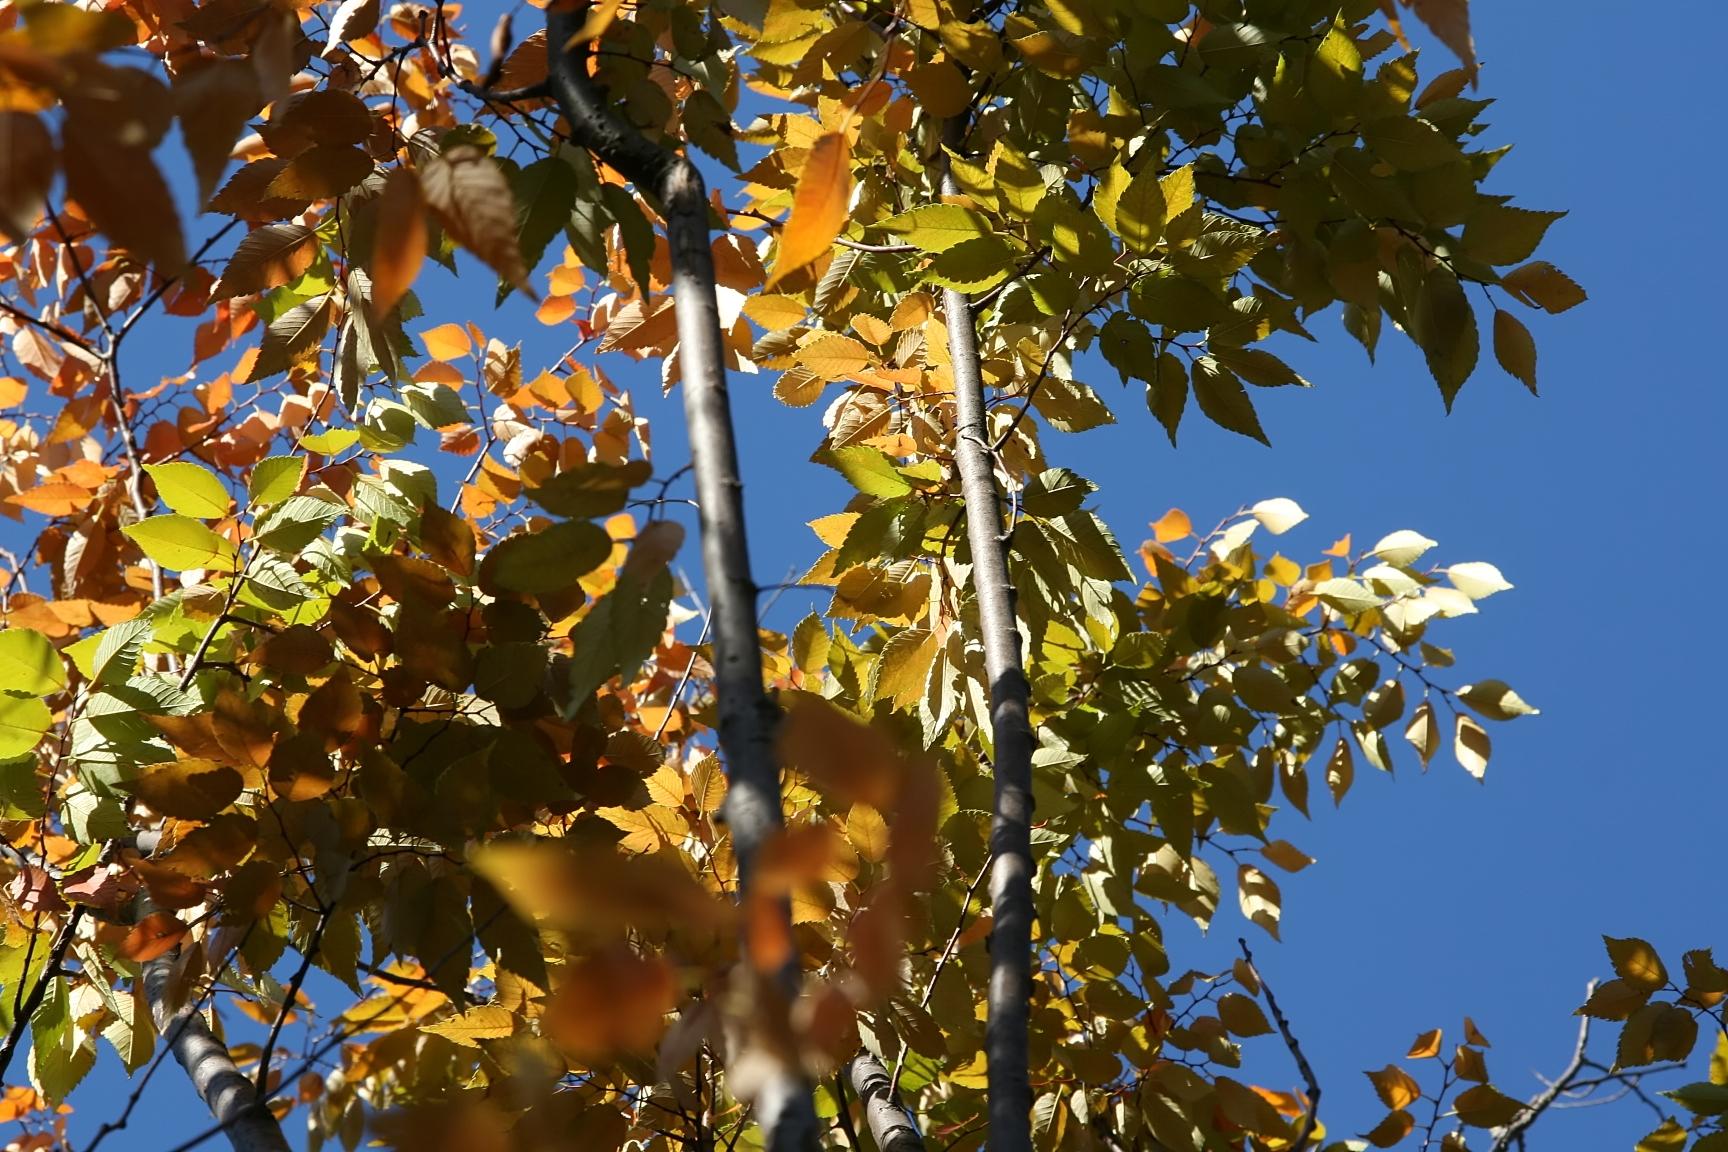 orange-olive foliage with gray branches
